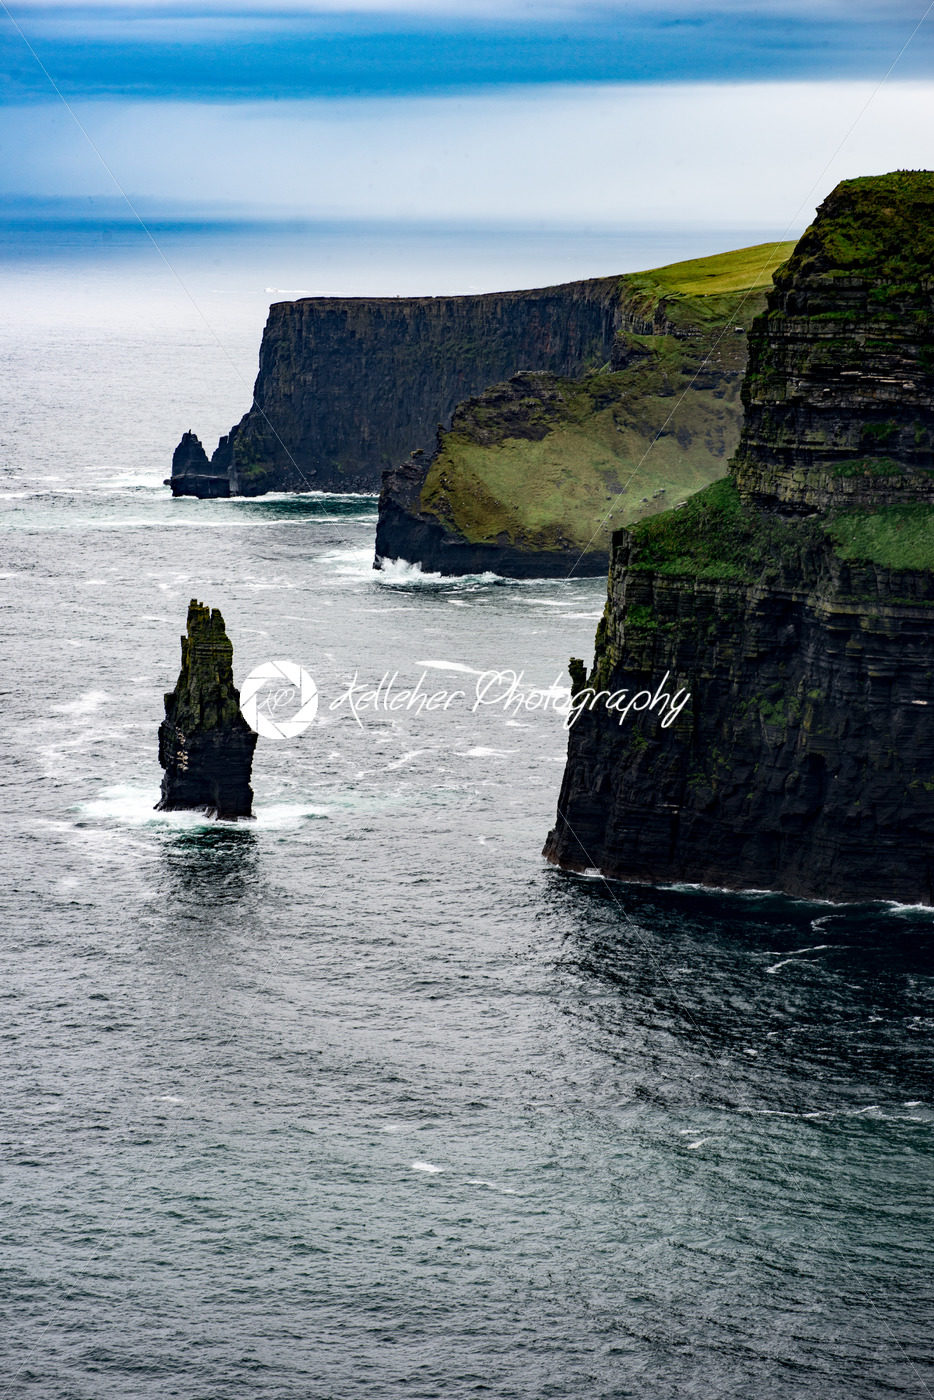 Cliffs of Moher Tourist Attraction in Ireland - Kelleher Photography Store